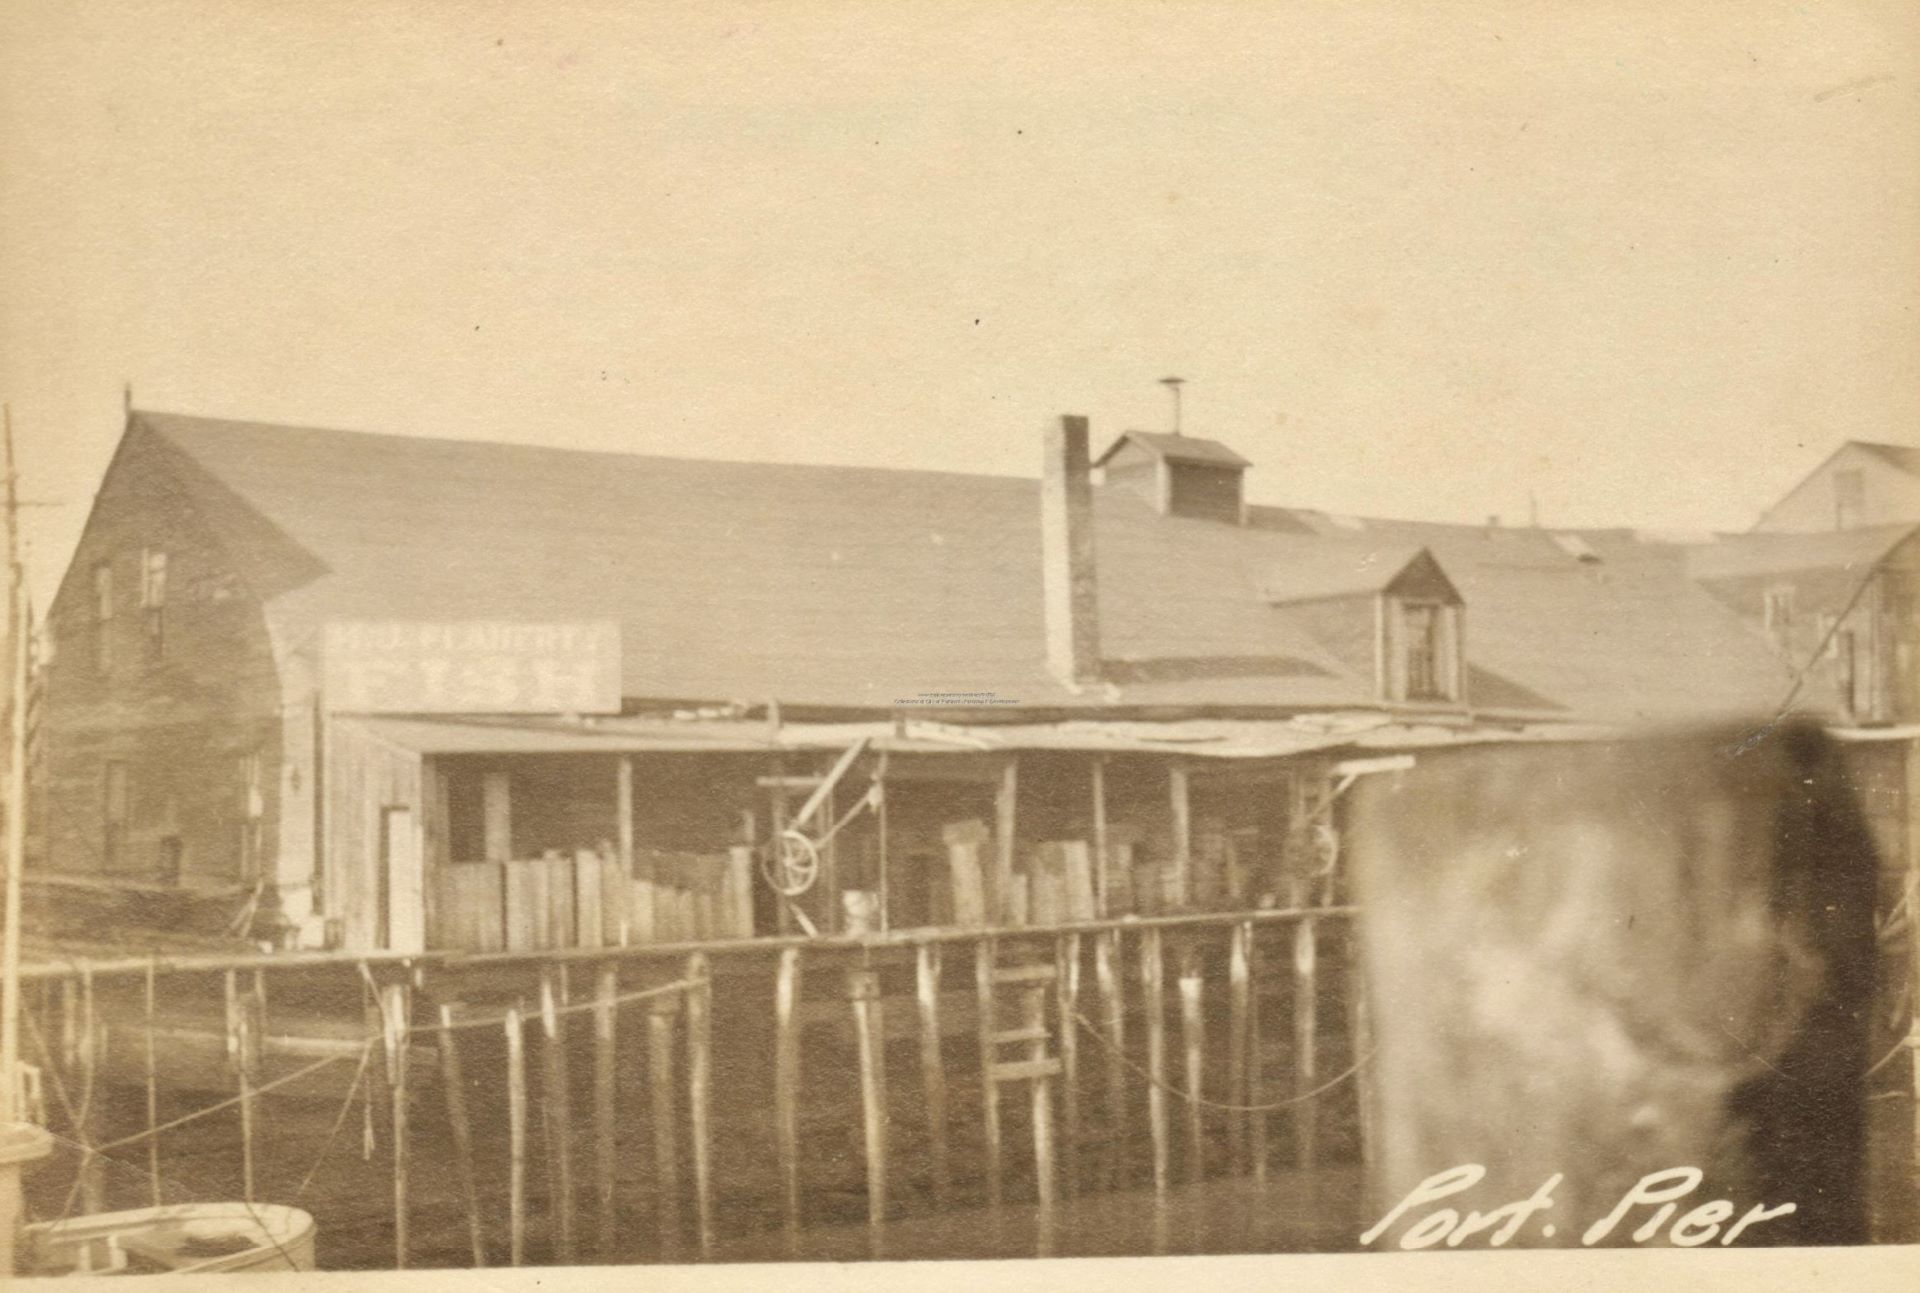 A photo from 1924 of 40 Portland Pier.